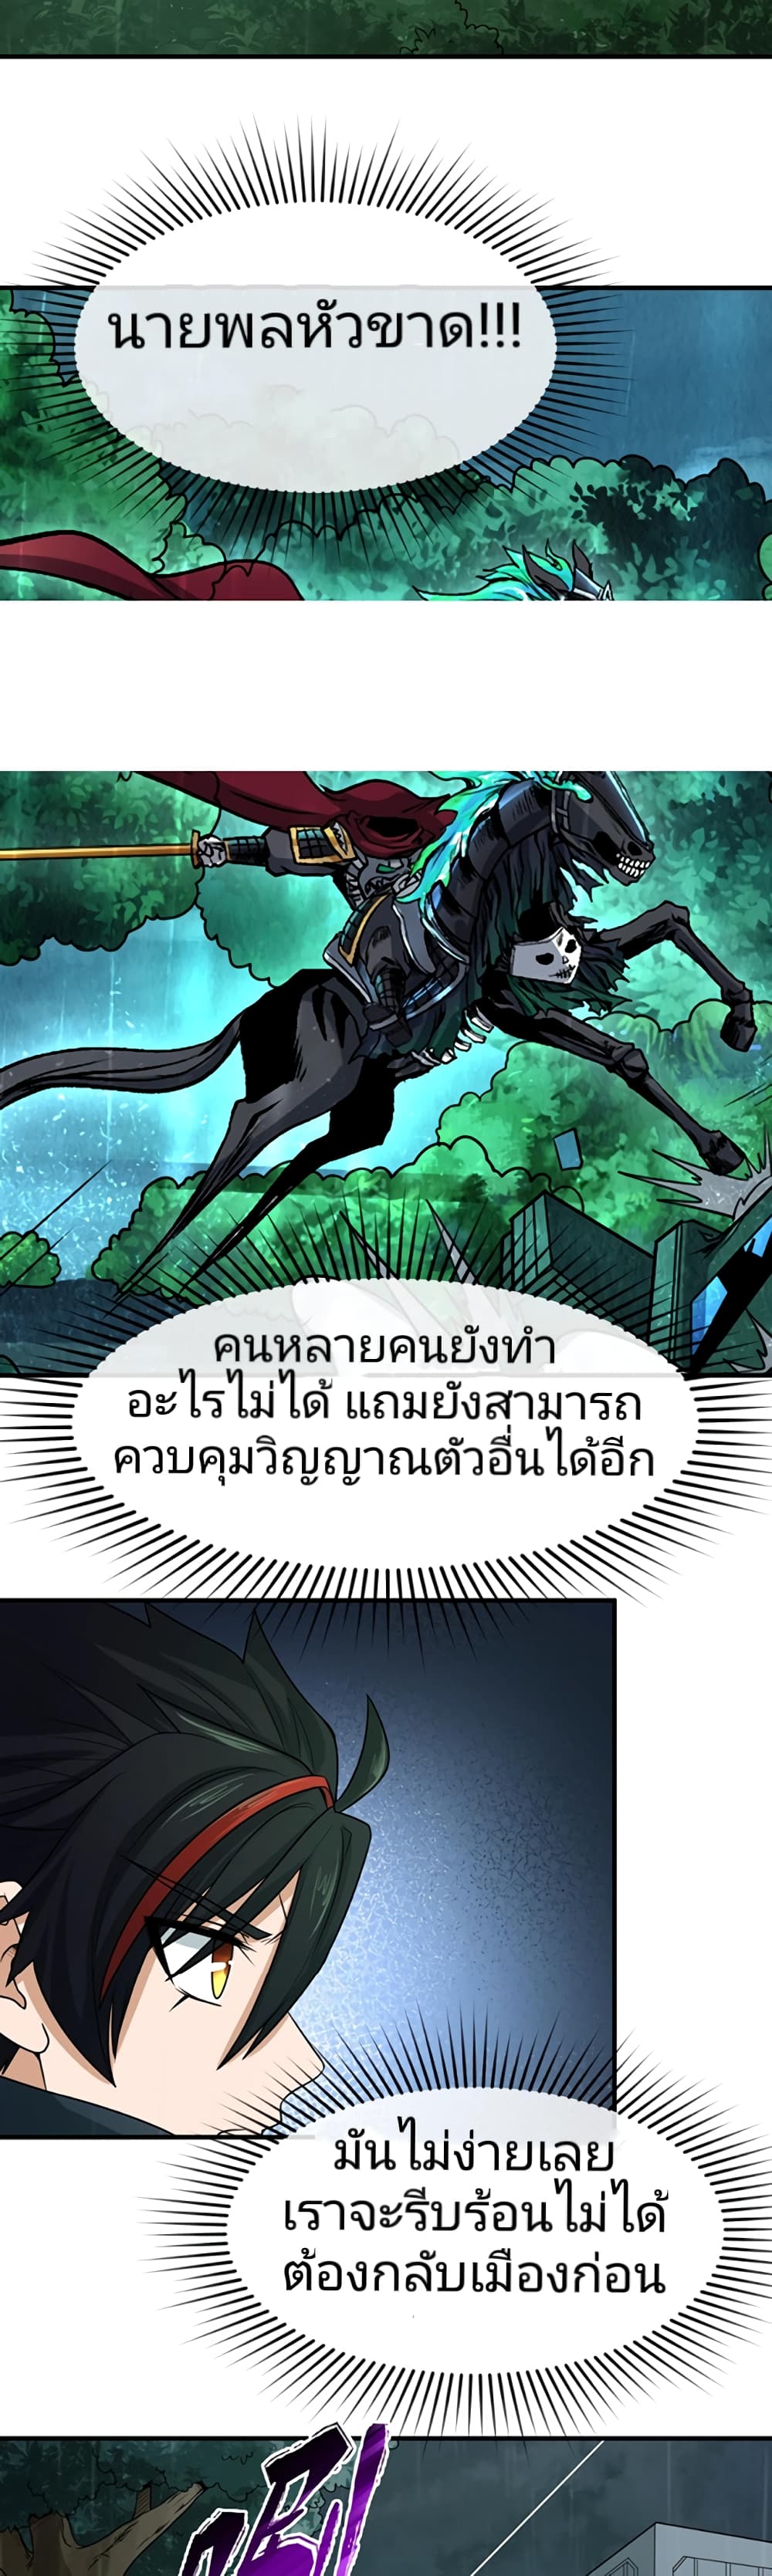 The Age of Ghost Spirits à¸à¸­à¸à¸à¸µà¹ 23 (15)